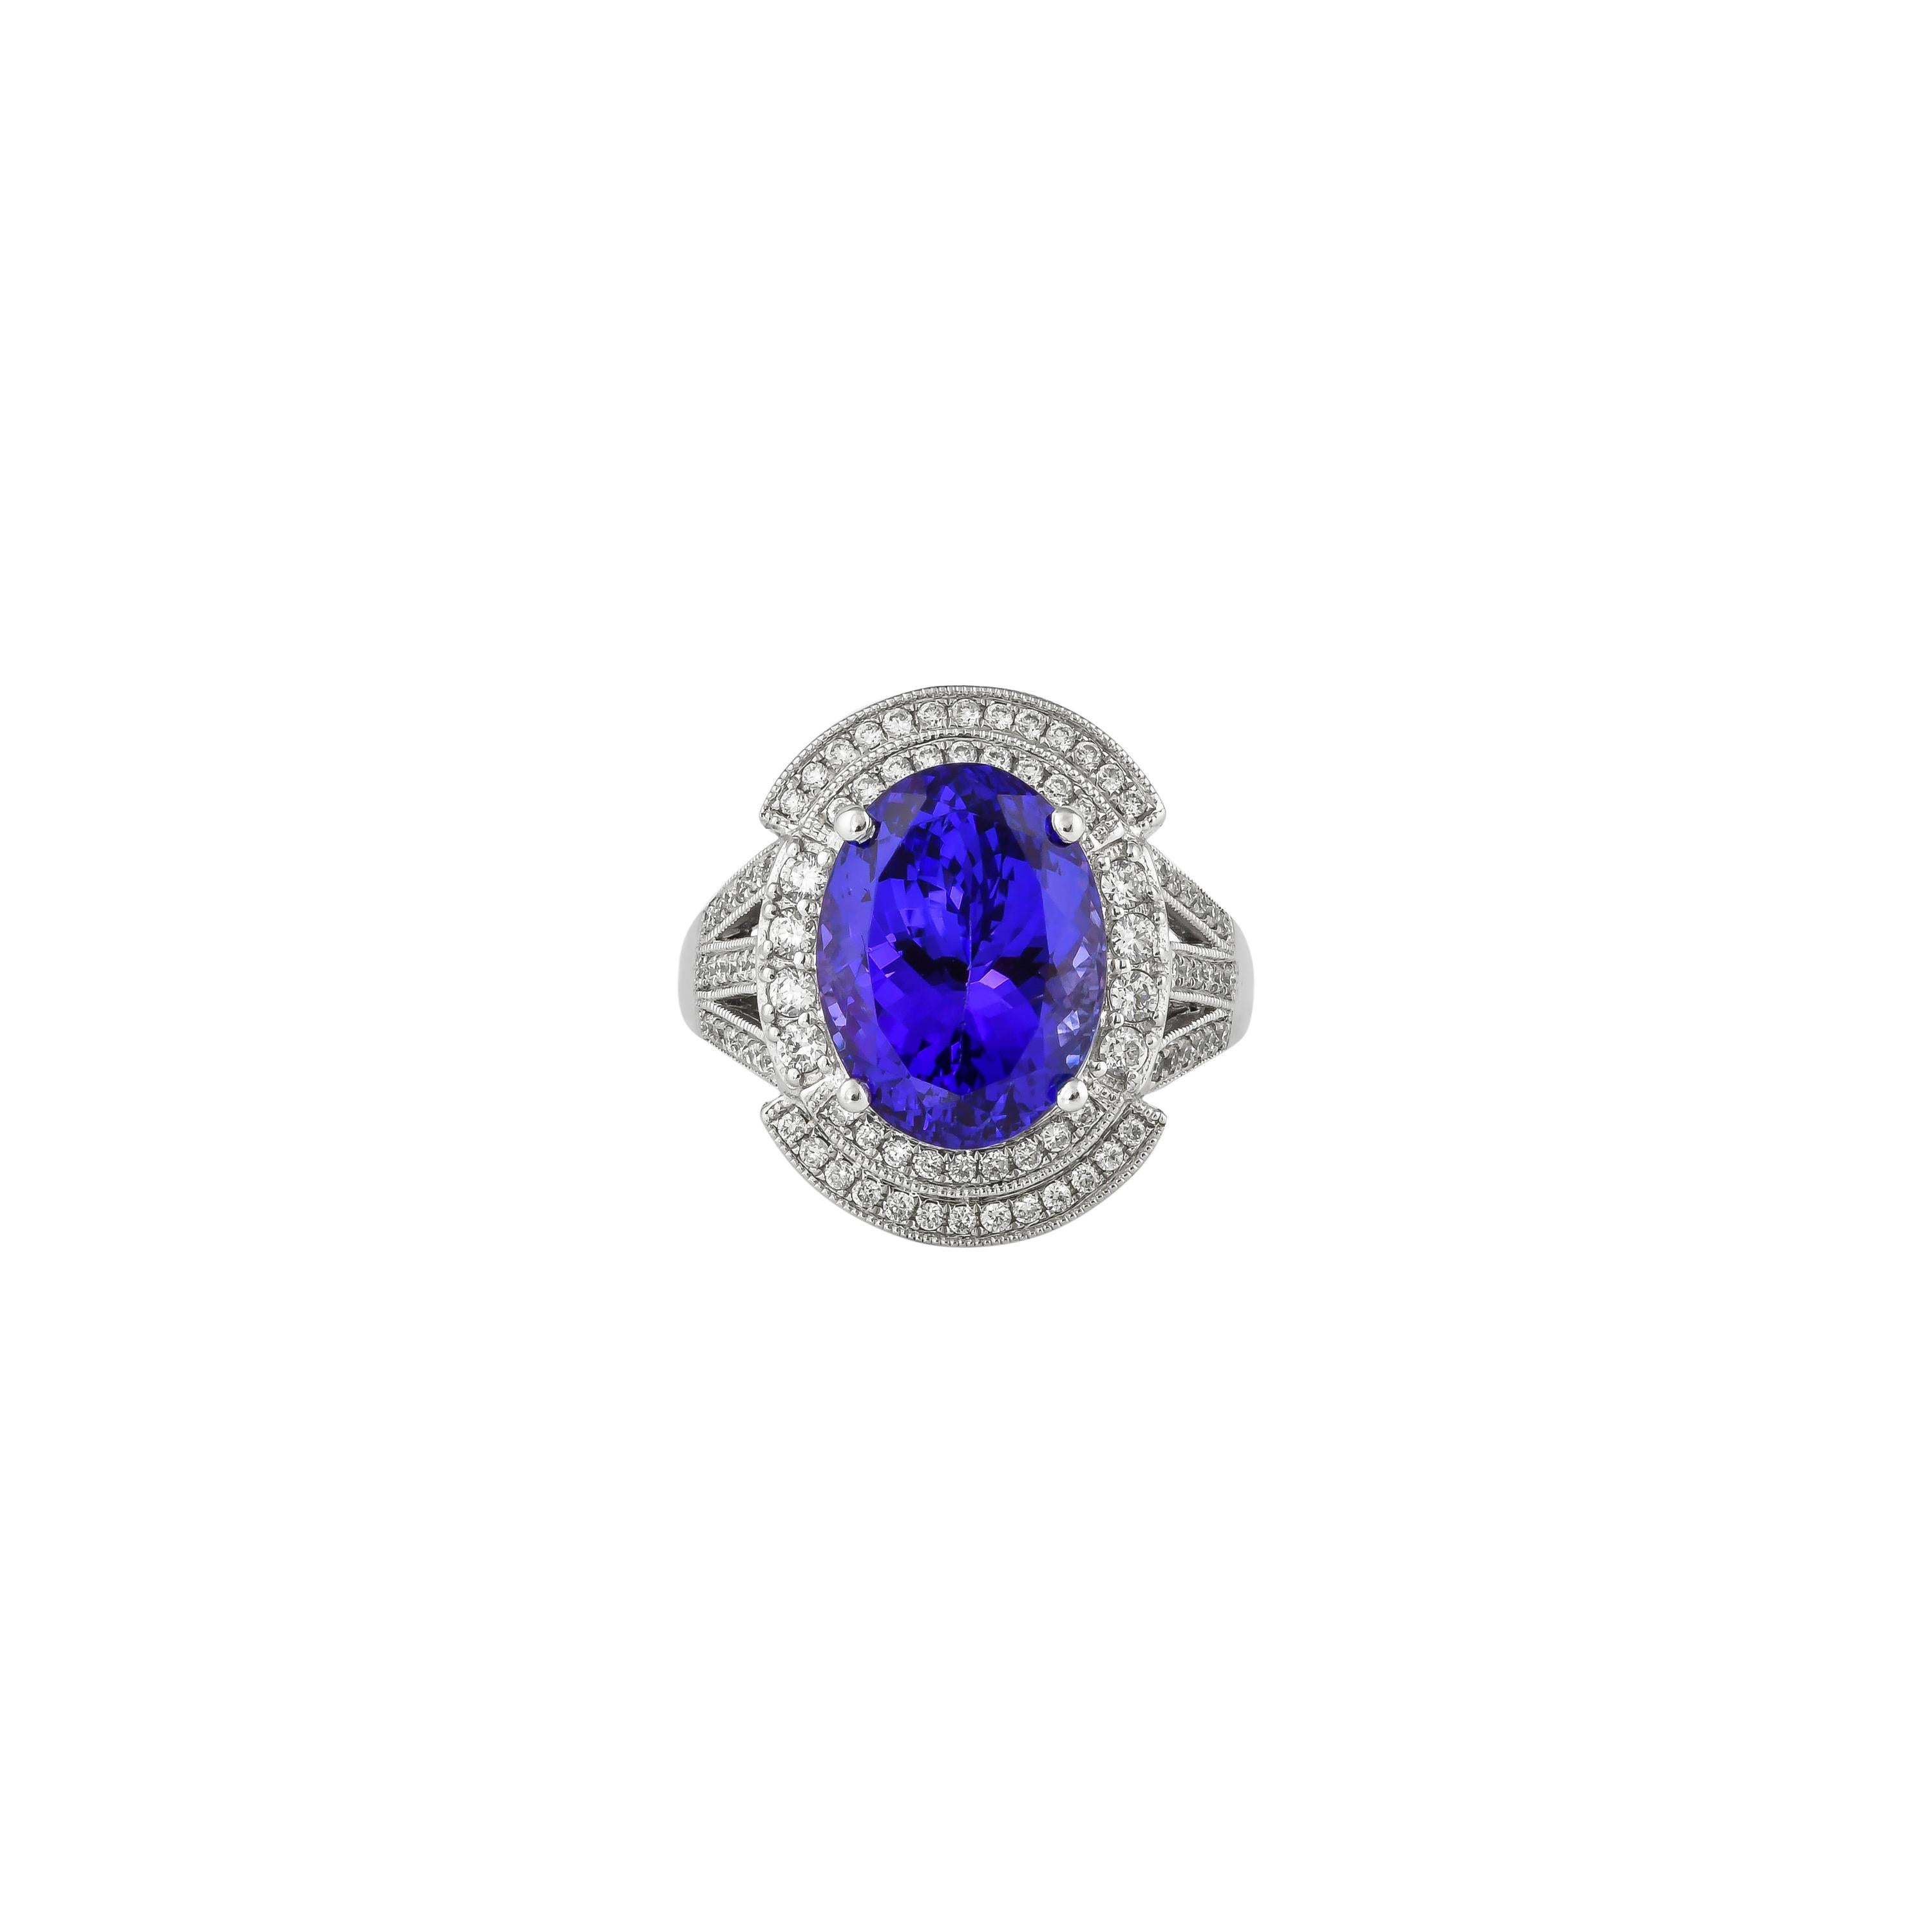 7.75 Carat Oval Shaped Tanzanite Ring in 18 Karat White Gold with Diamonds In New Condition For Sale In Hong Kong, HK